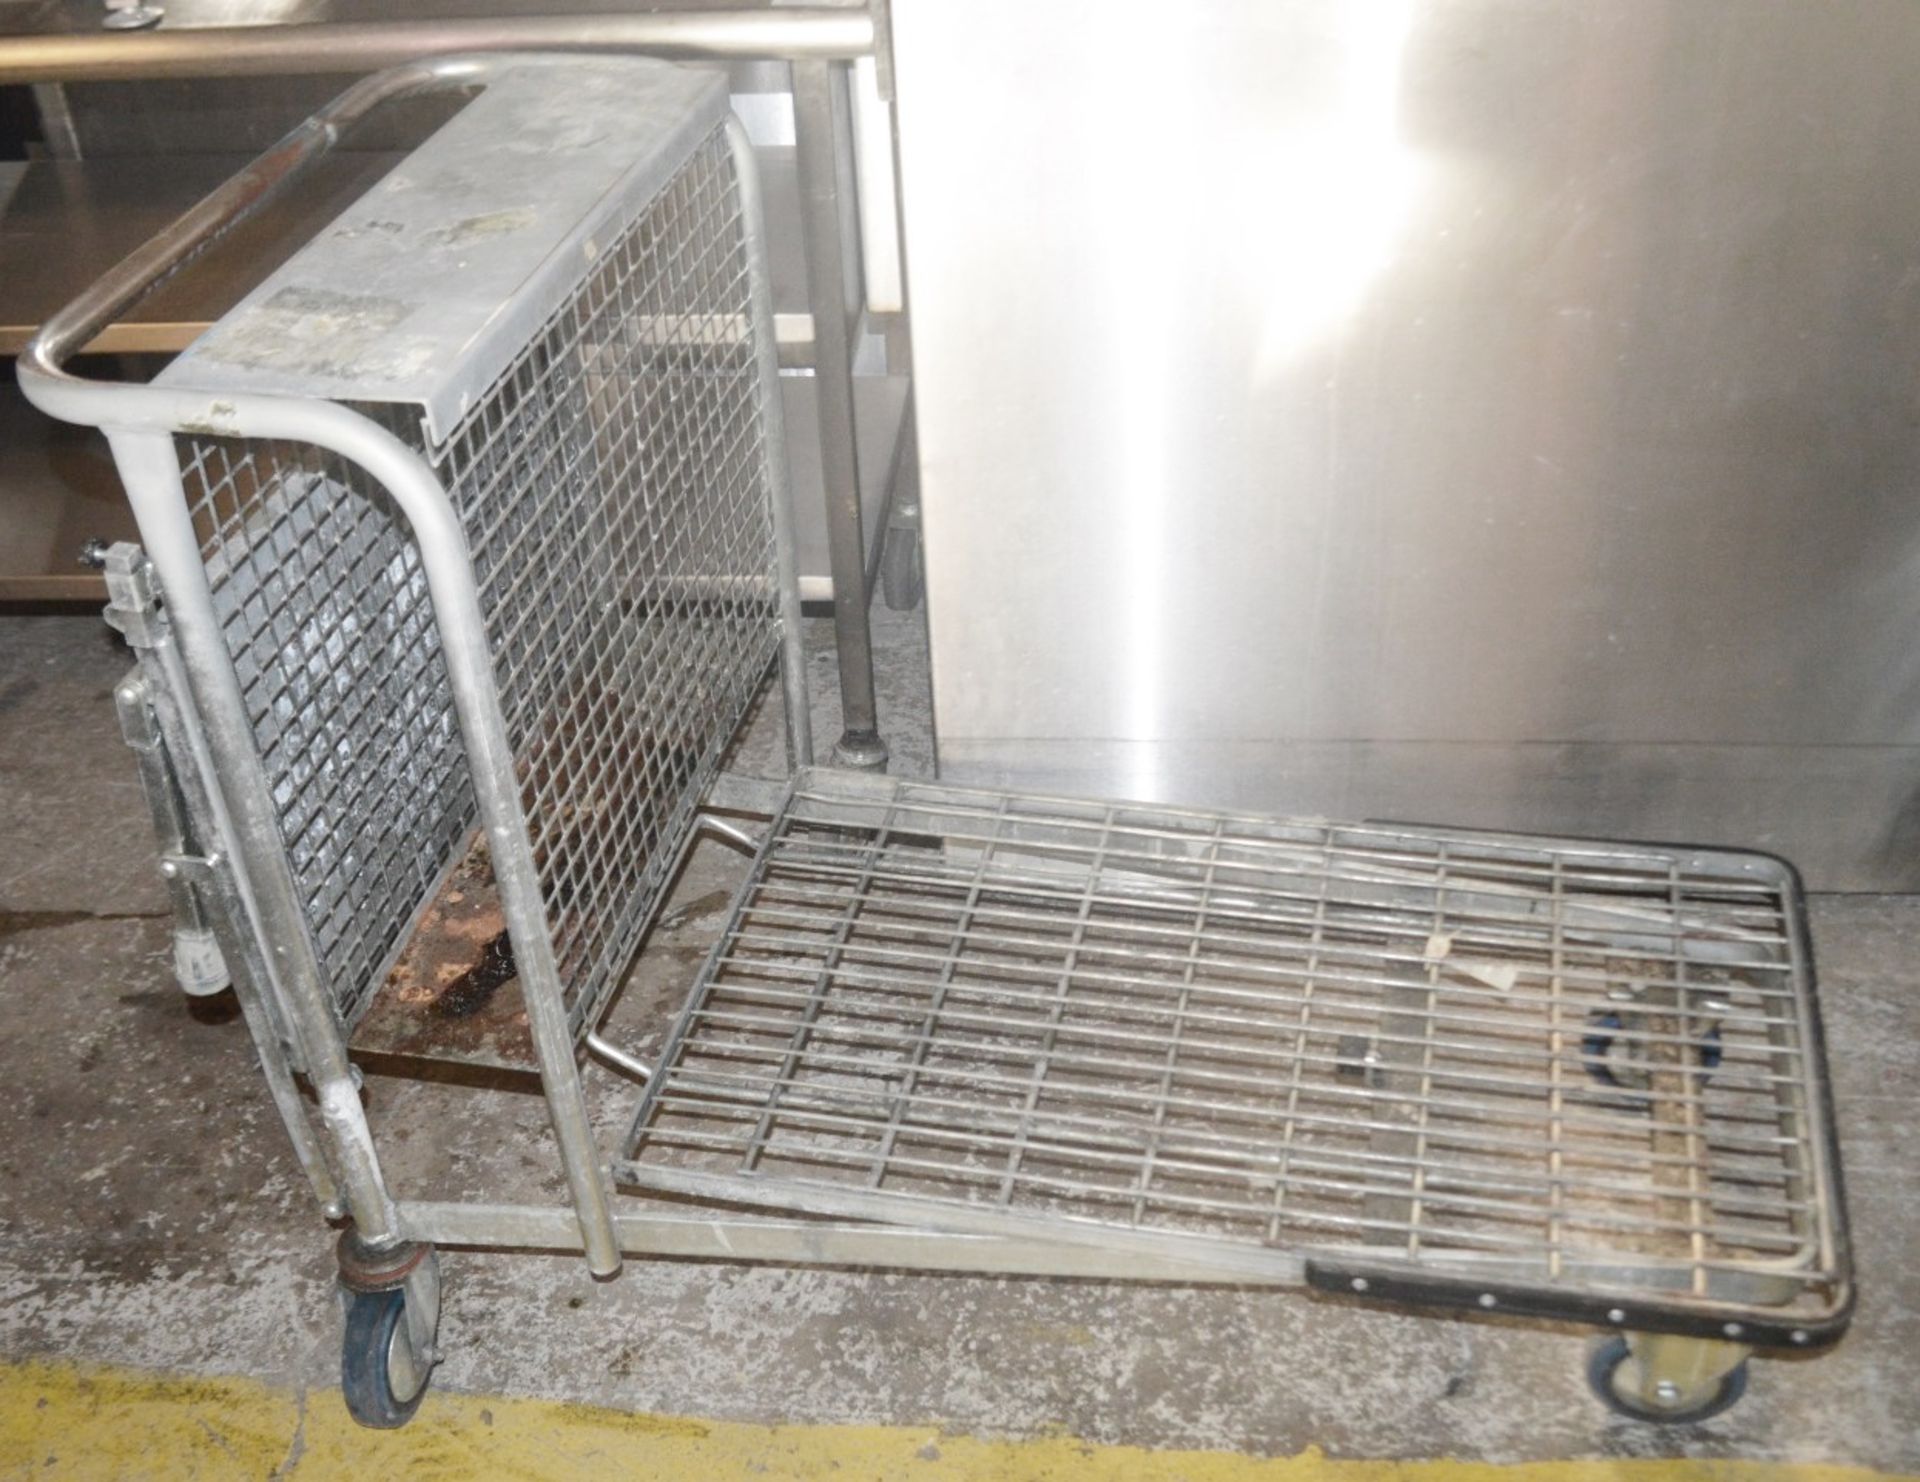 1 x Stainless Steel Commercial Packing Trolley Fold-down Back Shelf - Dimensions: H90 x W61 x D110/